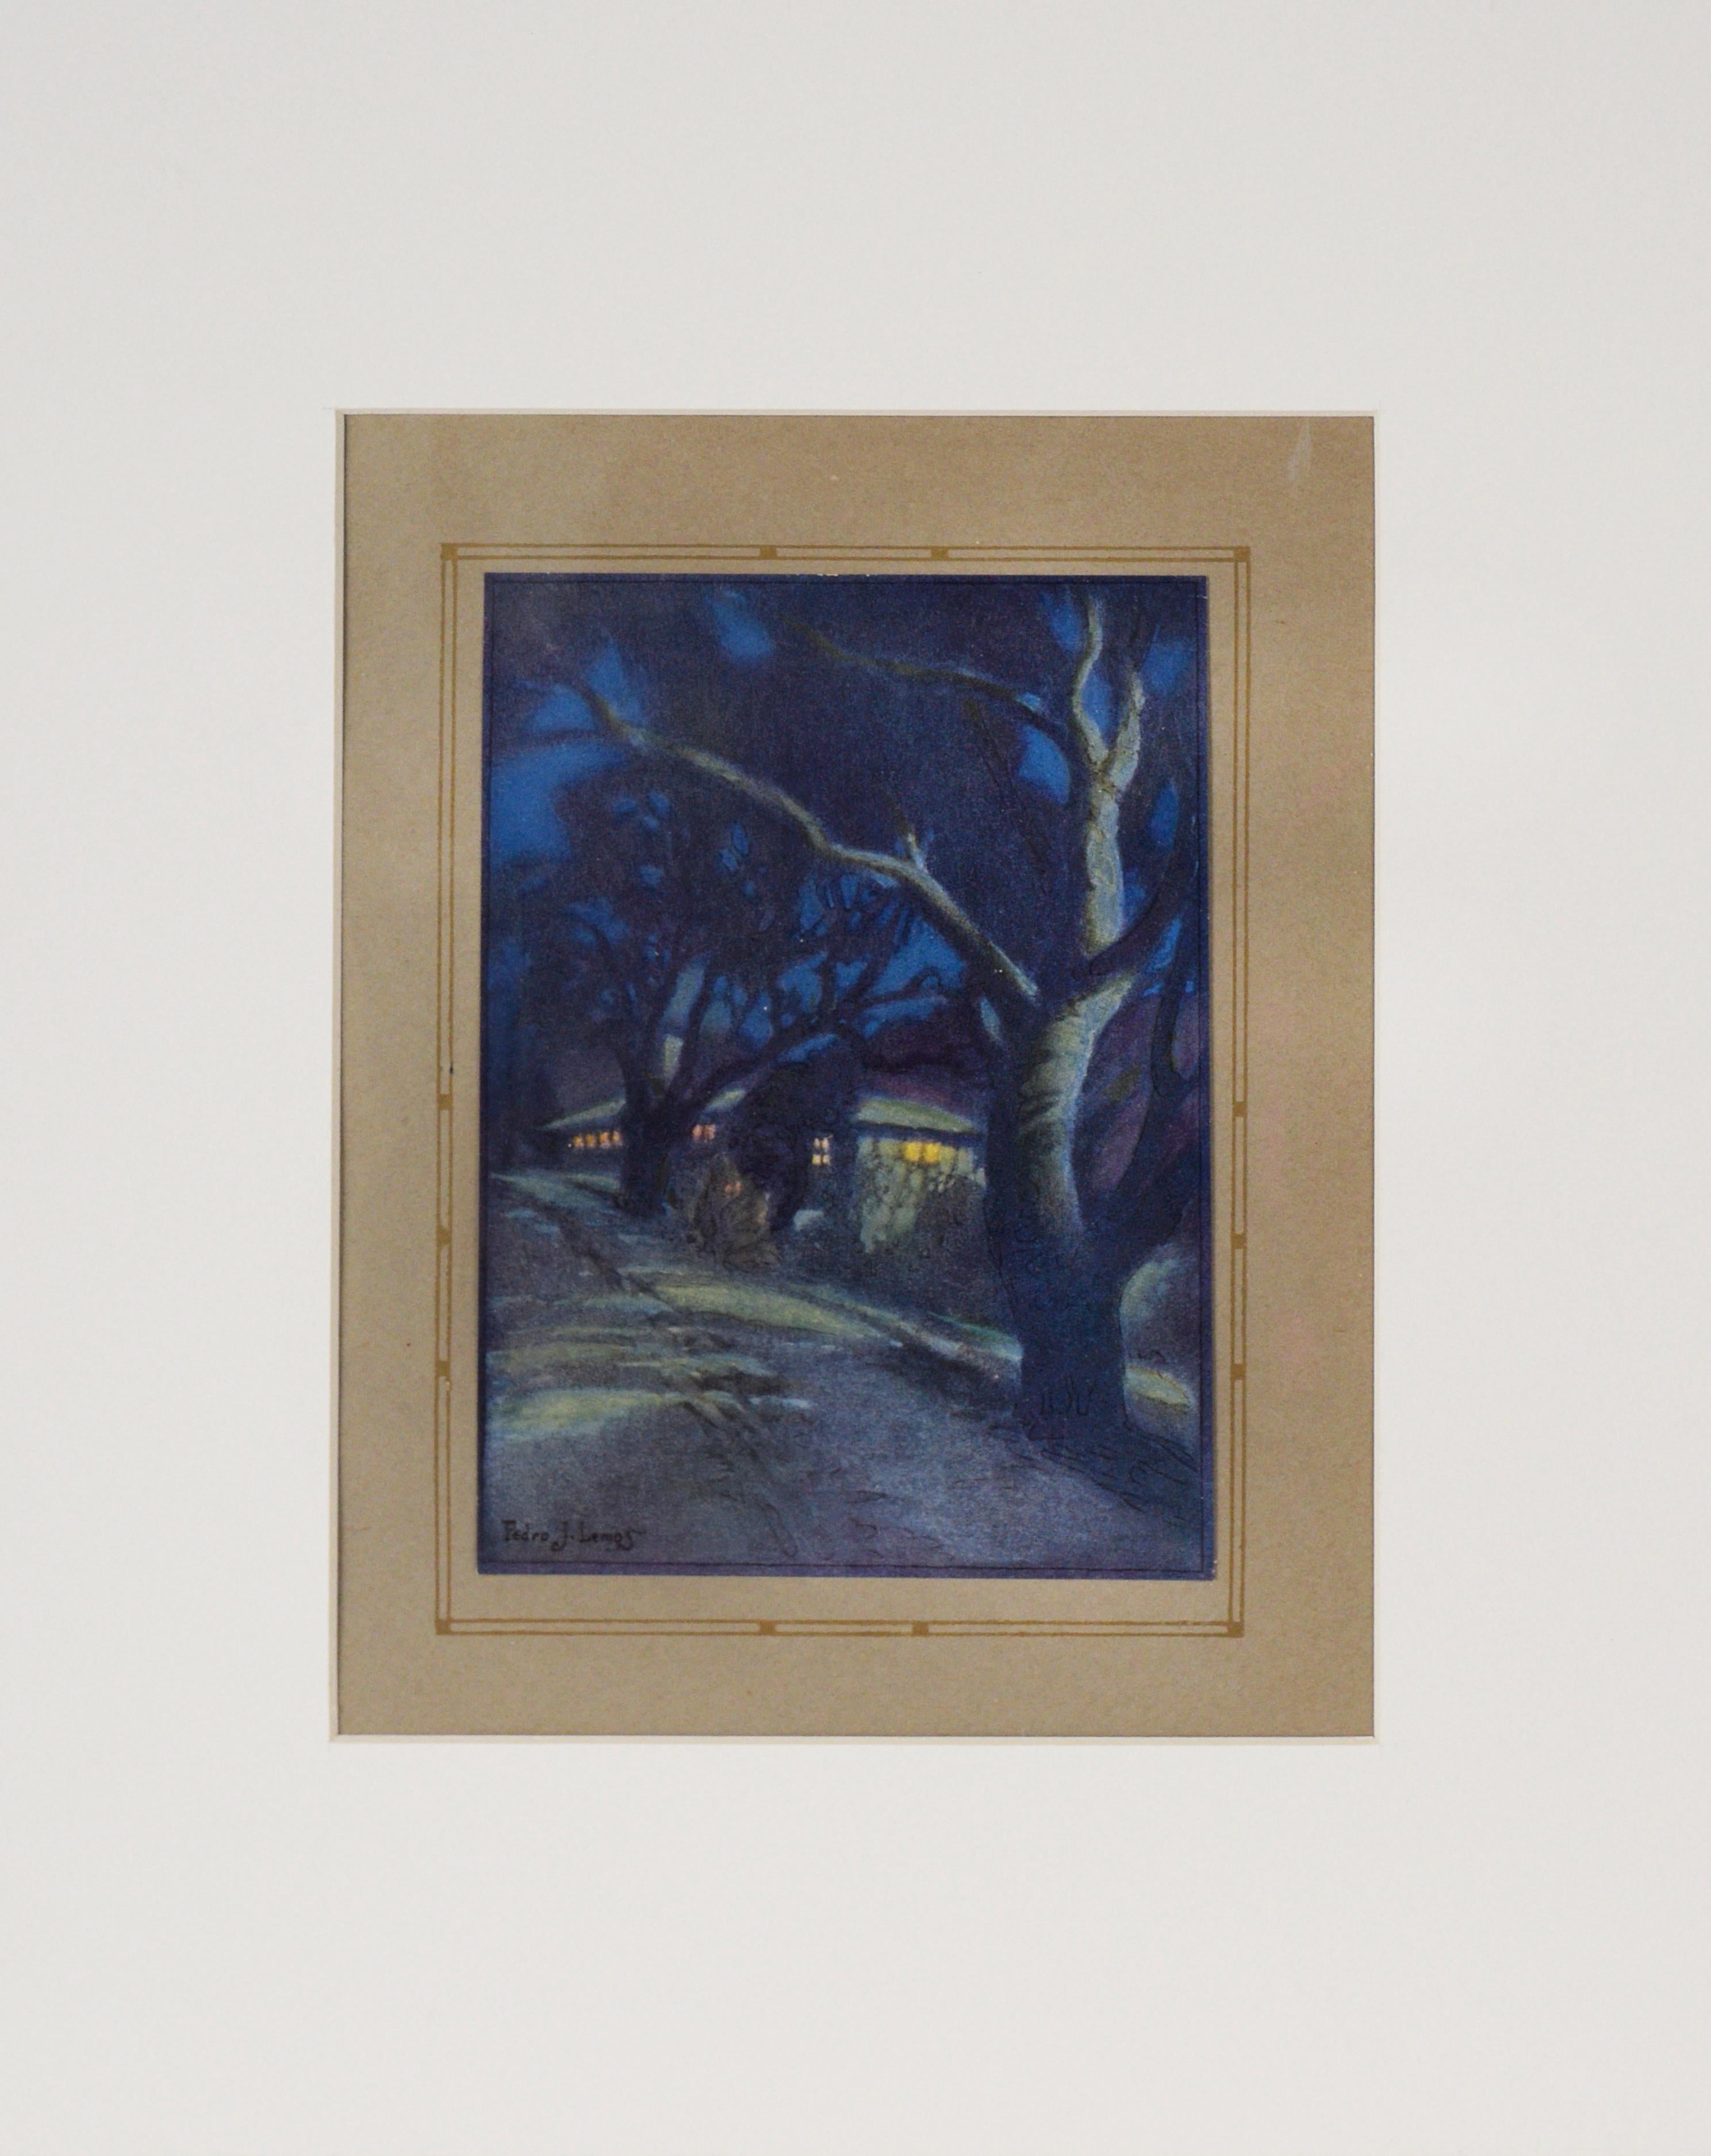 Pedro Lemos Landscape Print - "Senior Womens Hall In The Moonlight" 1921 UC Berkeley Yearbook Color Lithograph